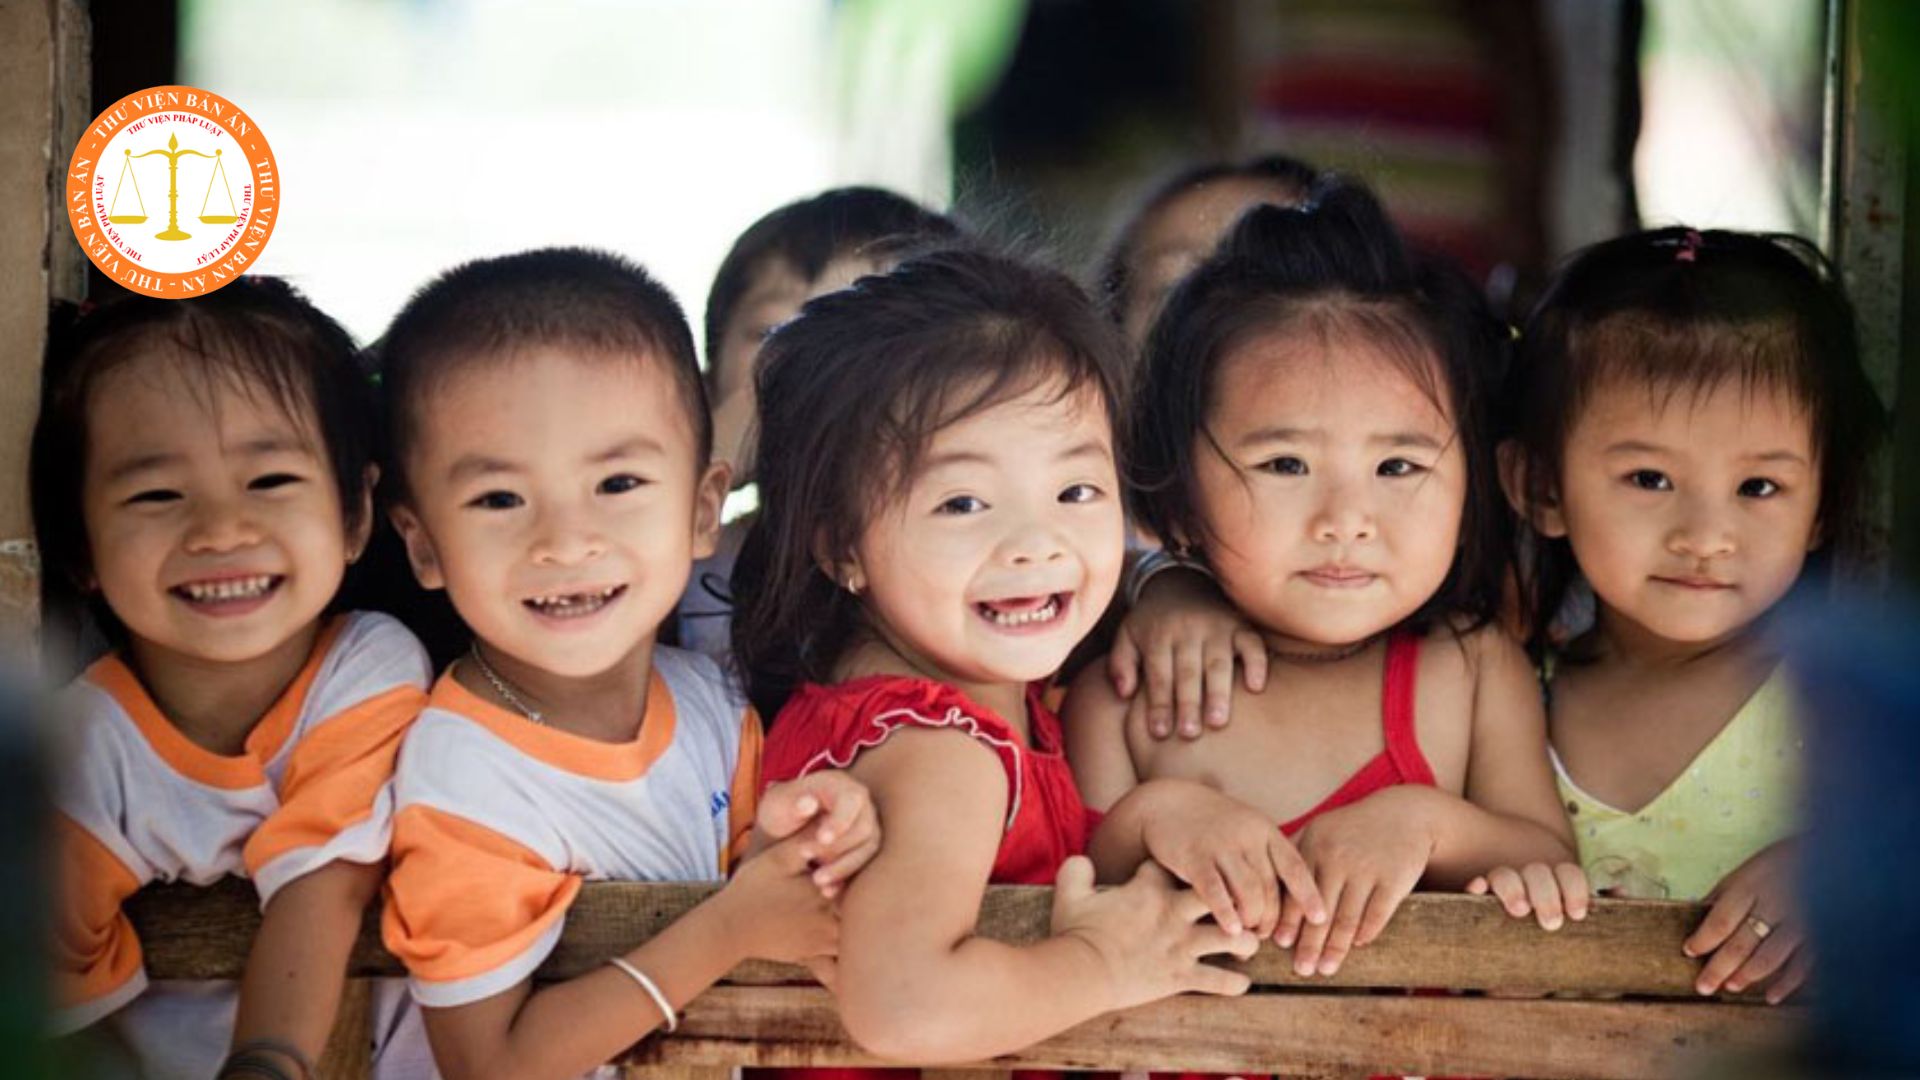 What are children's rights? Summary of basic rights of children under the law in Vietnam 